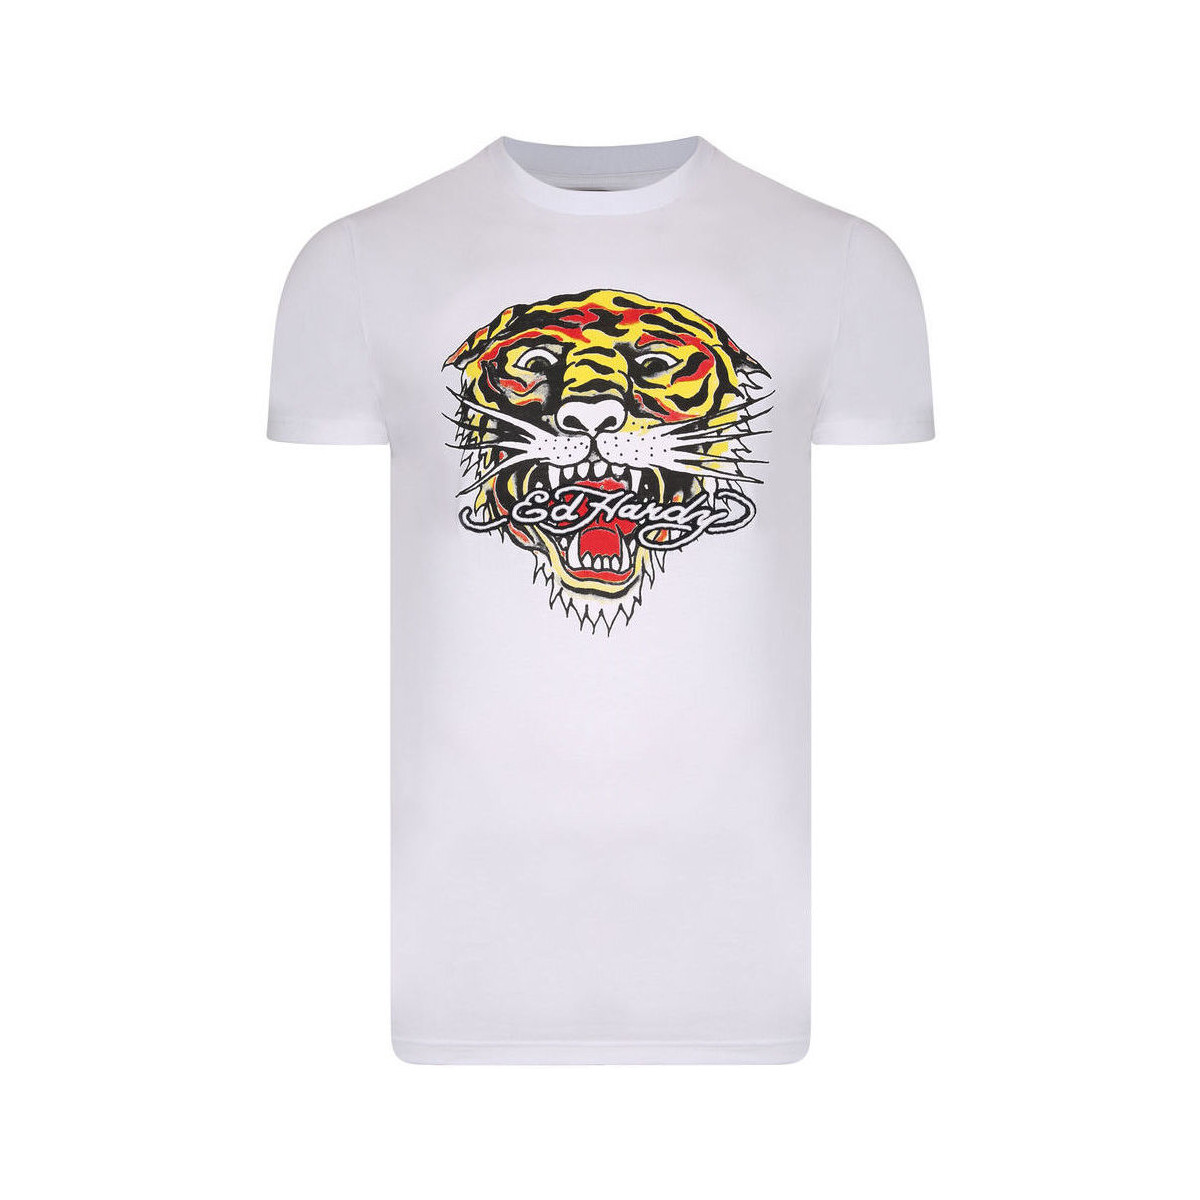 Textil Homem T-shirt pre-owned mangas curtas Ed Hardy Tiger mouth graphic t-shirt pre-owned white Branco